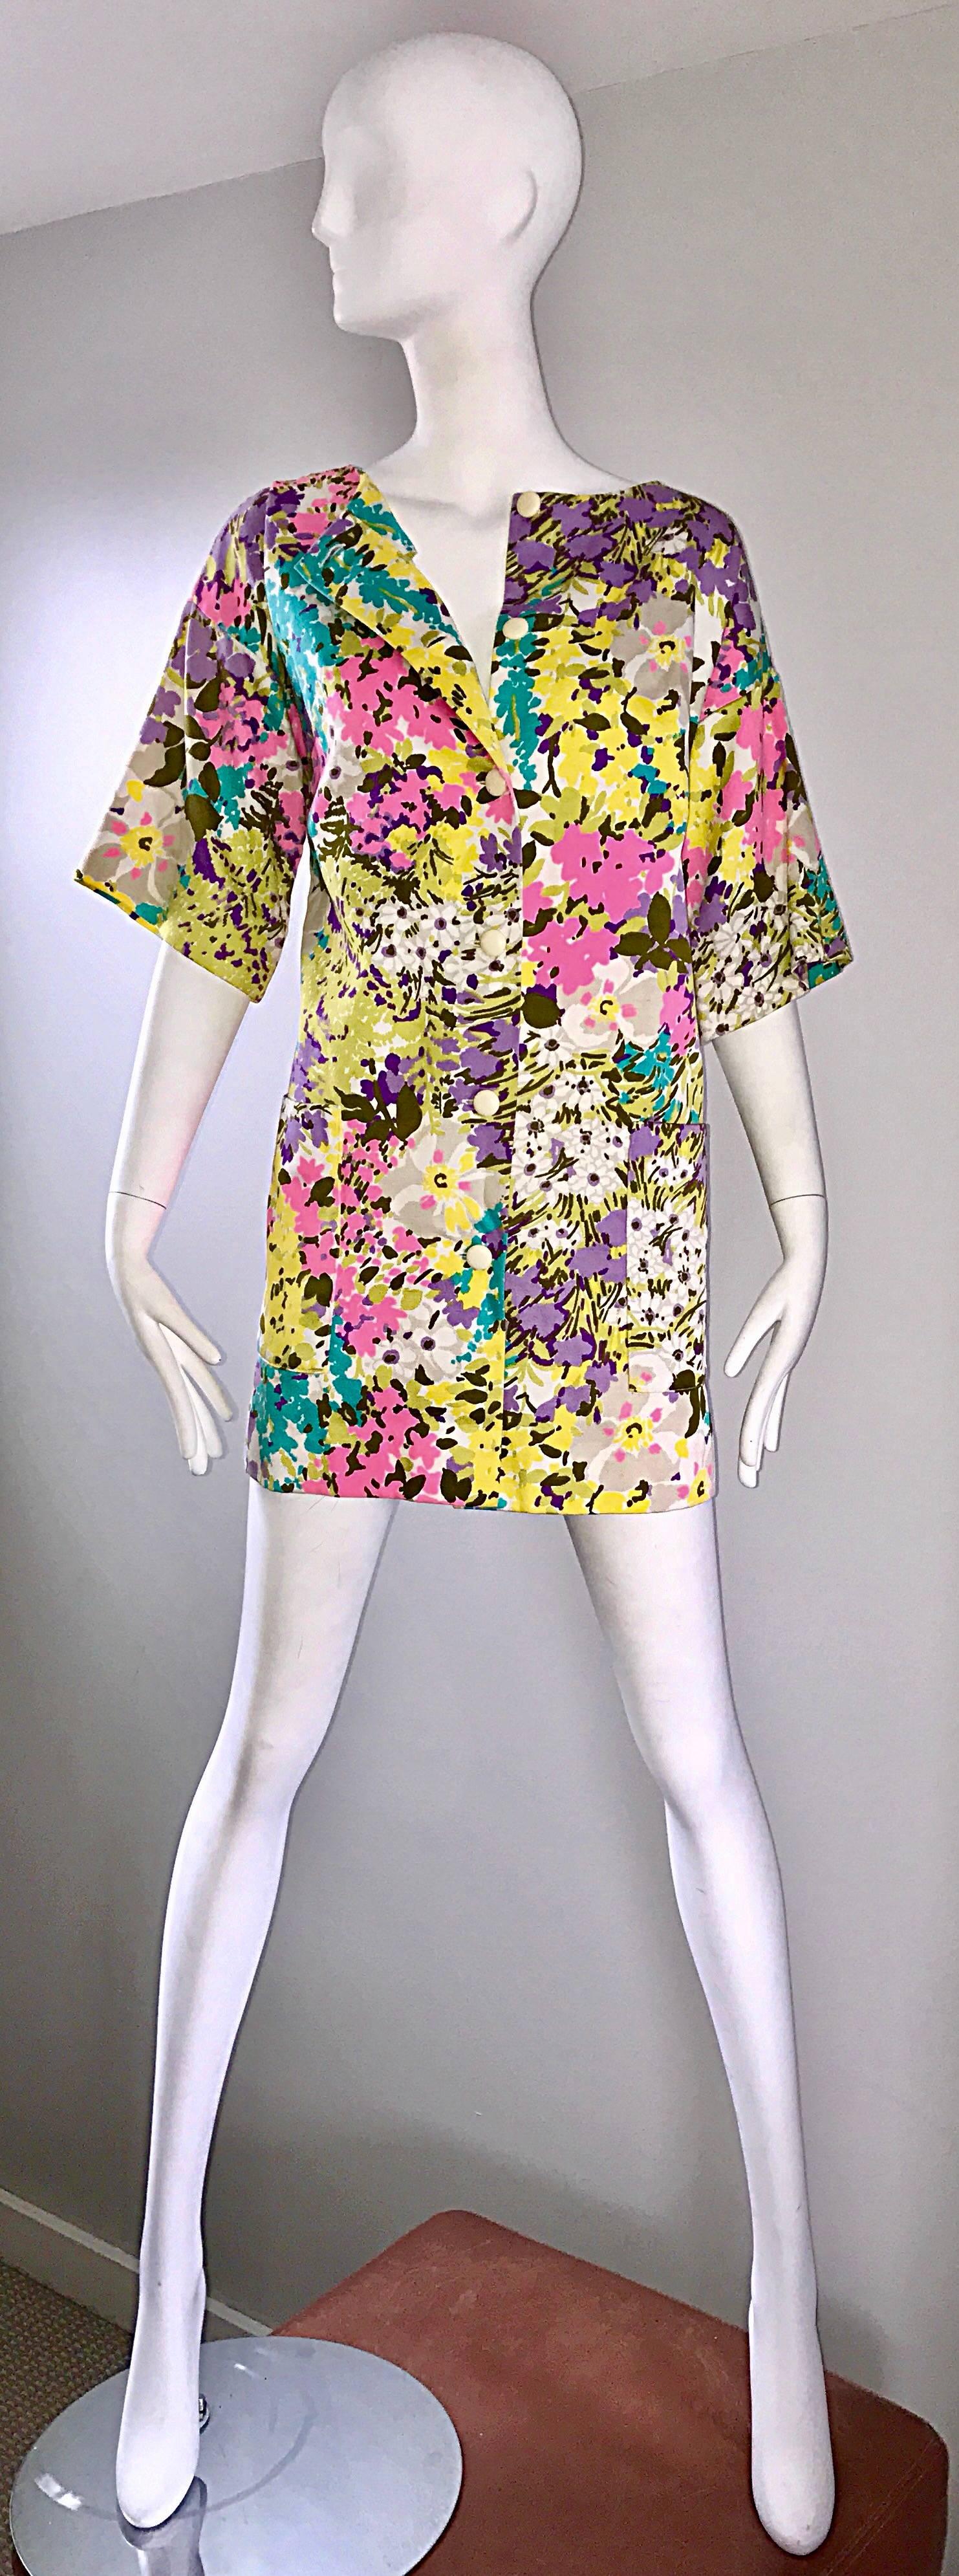 Chic 1960s Tori Richard for I Magnin Colorful Vintage Mini Dress or Swing Jacket In Excellent Condition For Sale In San Diego, CA